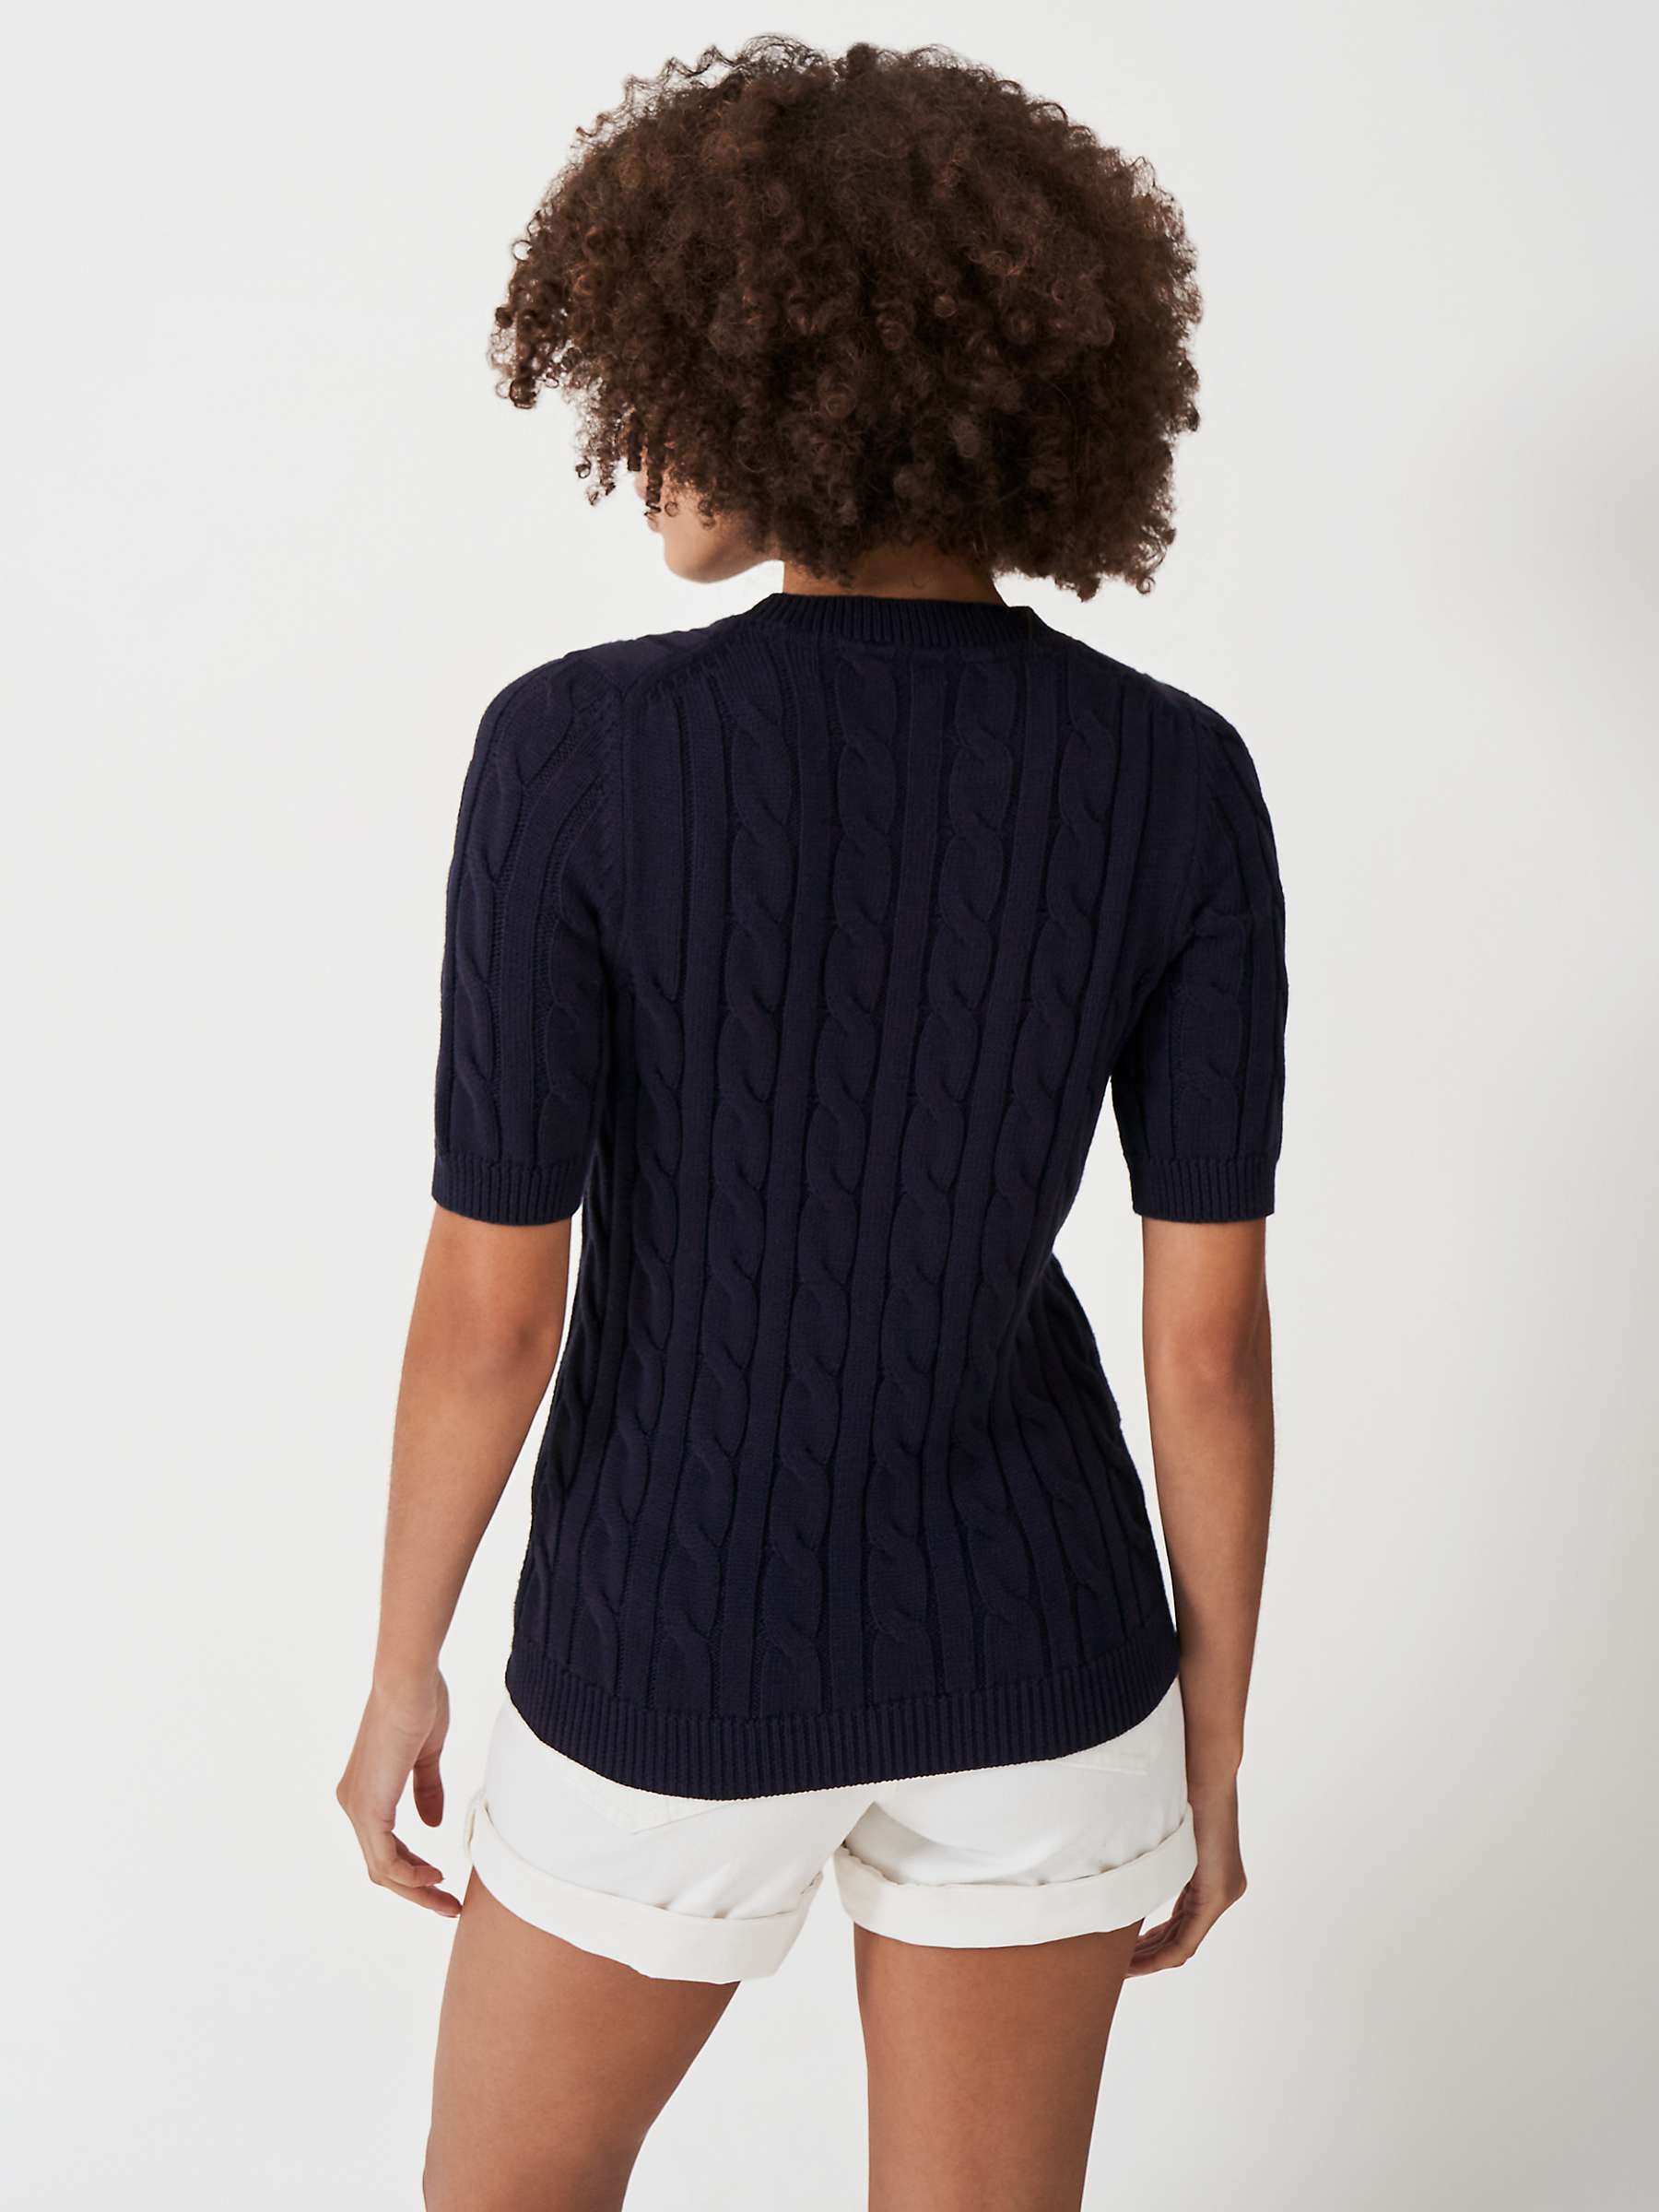 Buy Crew Clothing Cotton Summer Cable Knit Jumper Online at johnlewis.com